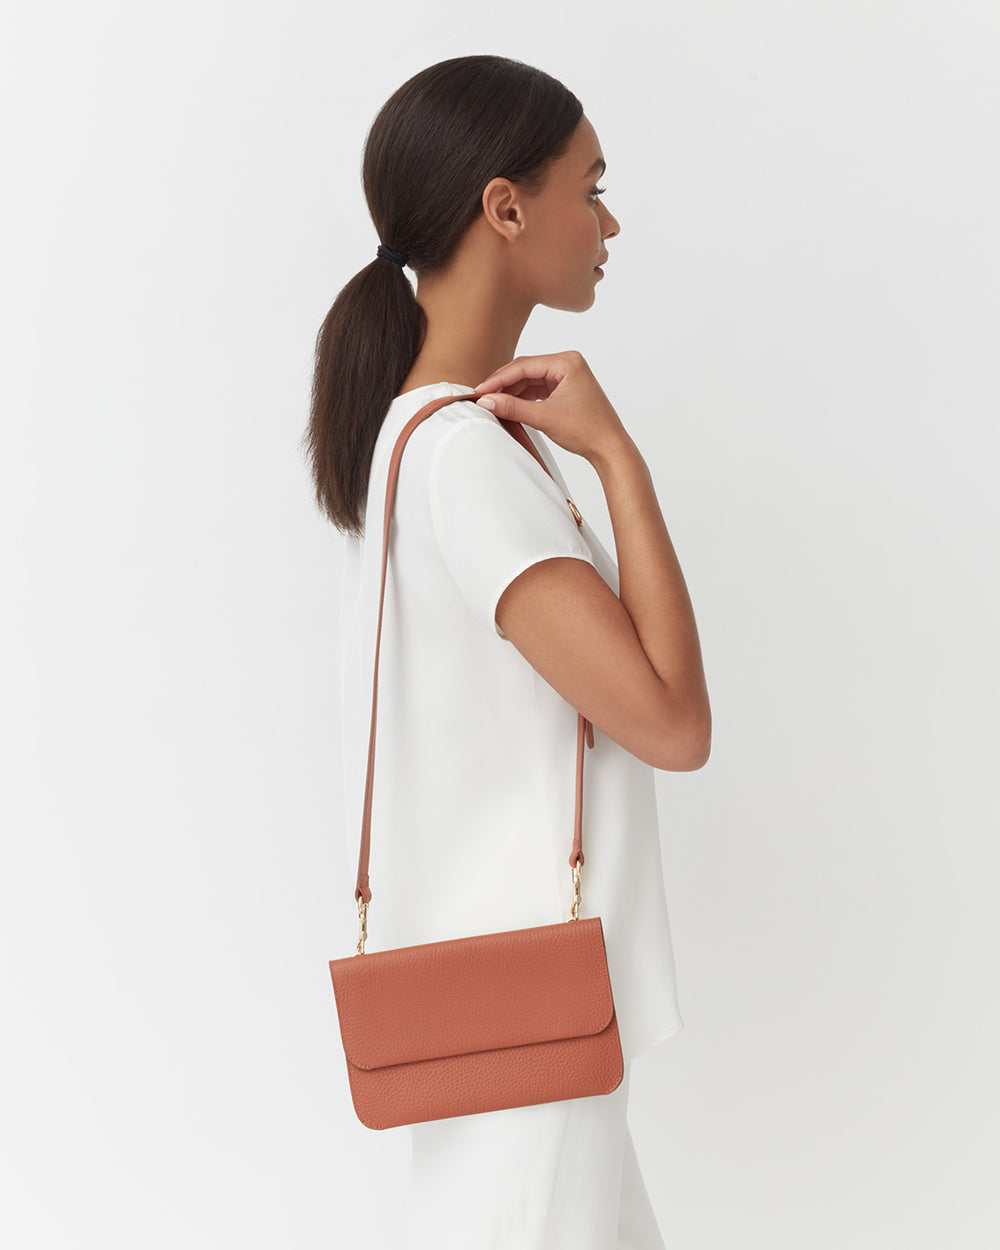 Woman with a shoulder bag looking to the side